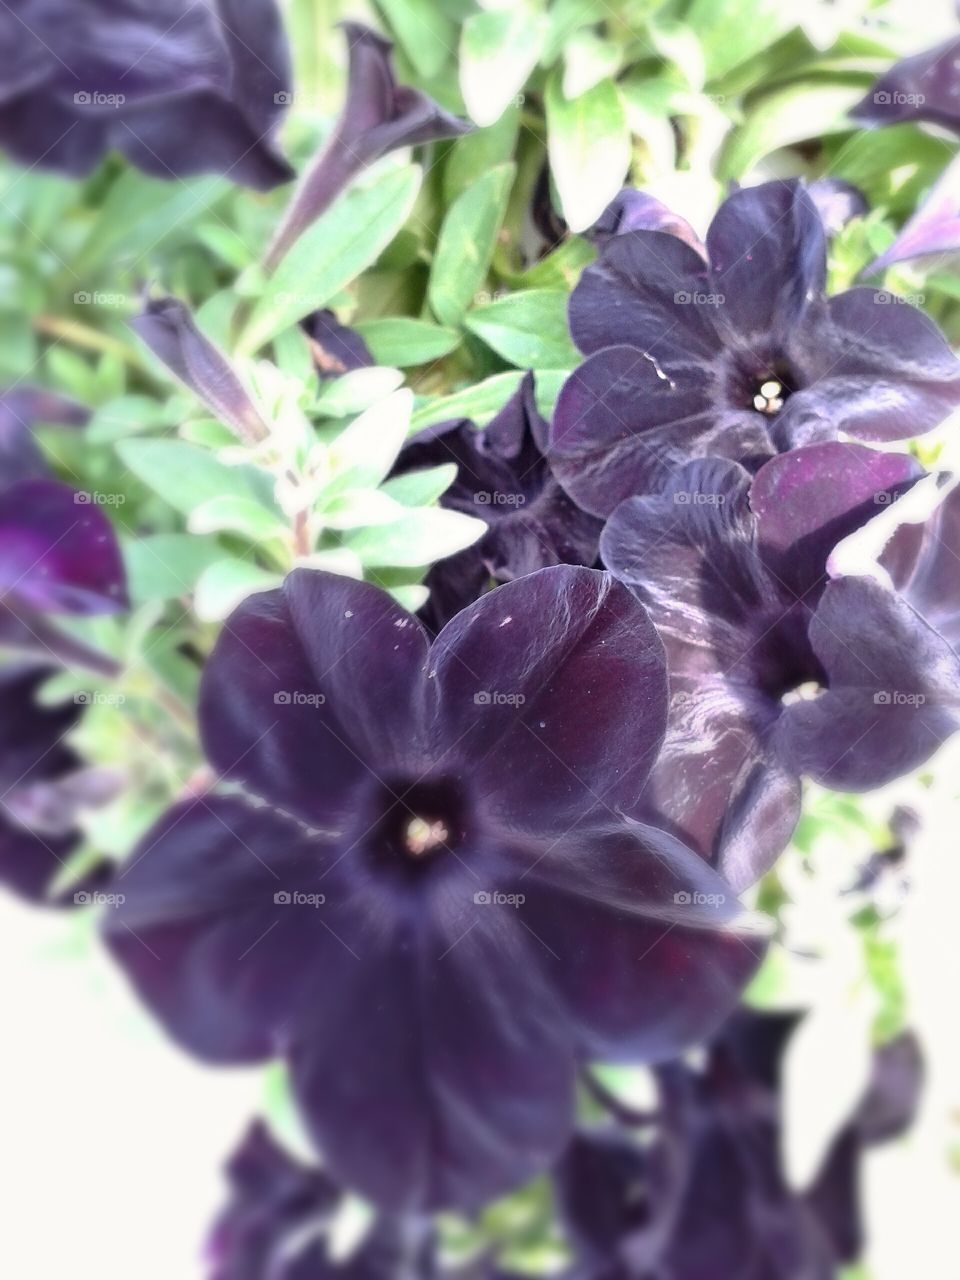 Black Petunia.  The dramatic depth of this flower is amazing.